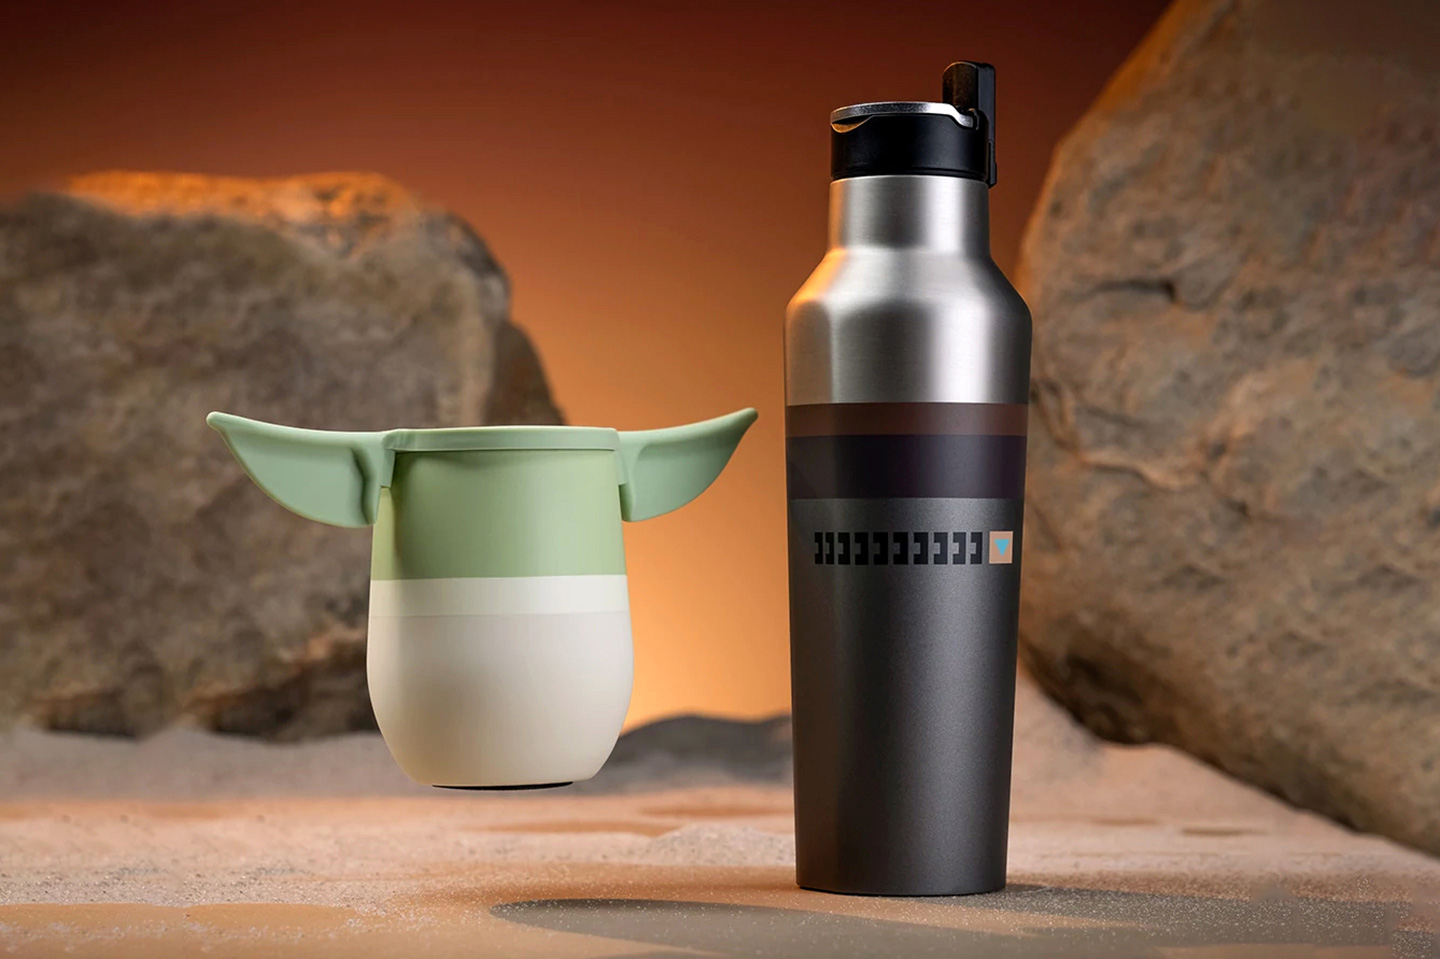 #How adorable is this Baby Yoda and Mandalorian themed Travel Mug and Thermos?!